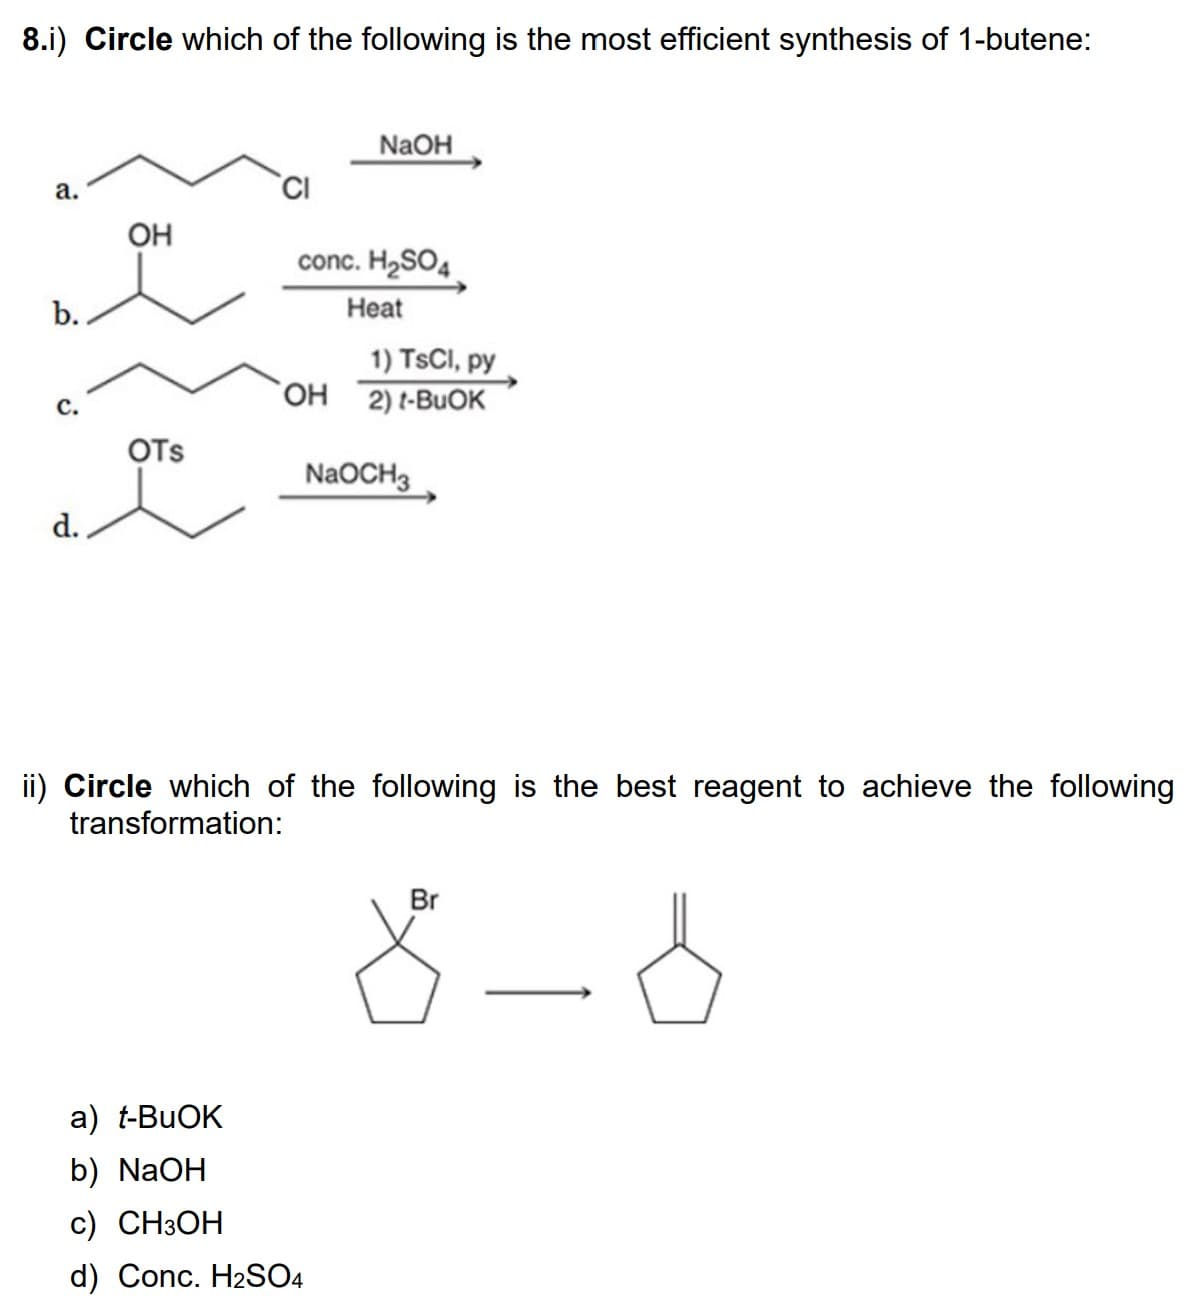 8.i) Circle which of the following is the most efficient synthesis of 1-butene:
a.
b.
C.
d.
OH
OTS
CI
NaOH
conc. H₂SO4
Heat
1) TsCl, py
OH 2) t-BUOK
NaOCH3
ii) Circle which of the following is the best reagent to achieve the following
transformation:
a) t-BuOK
b) NaOH
c) CH3OH
d) Conc. H₂SO4
8-6
Br